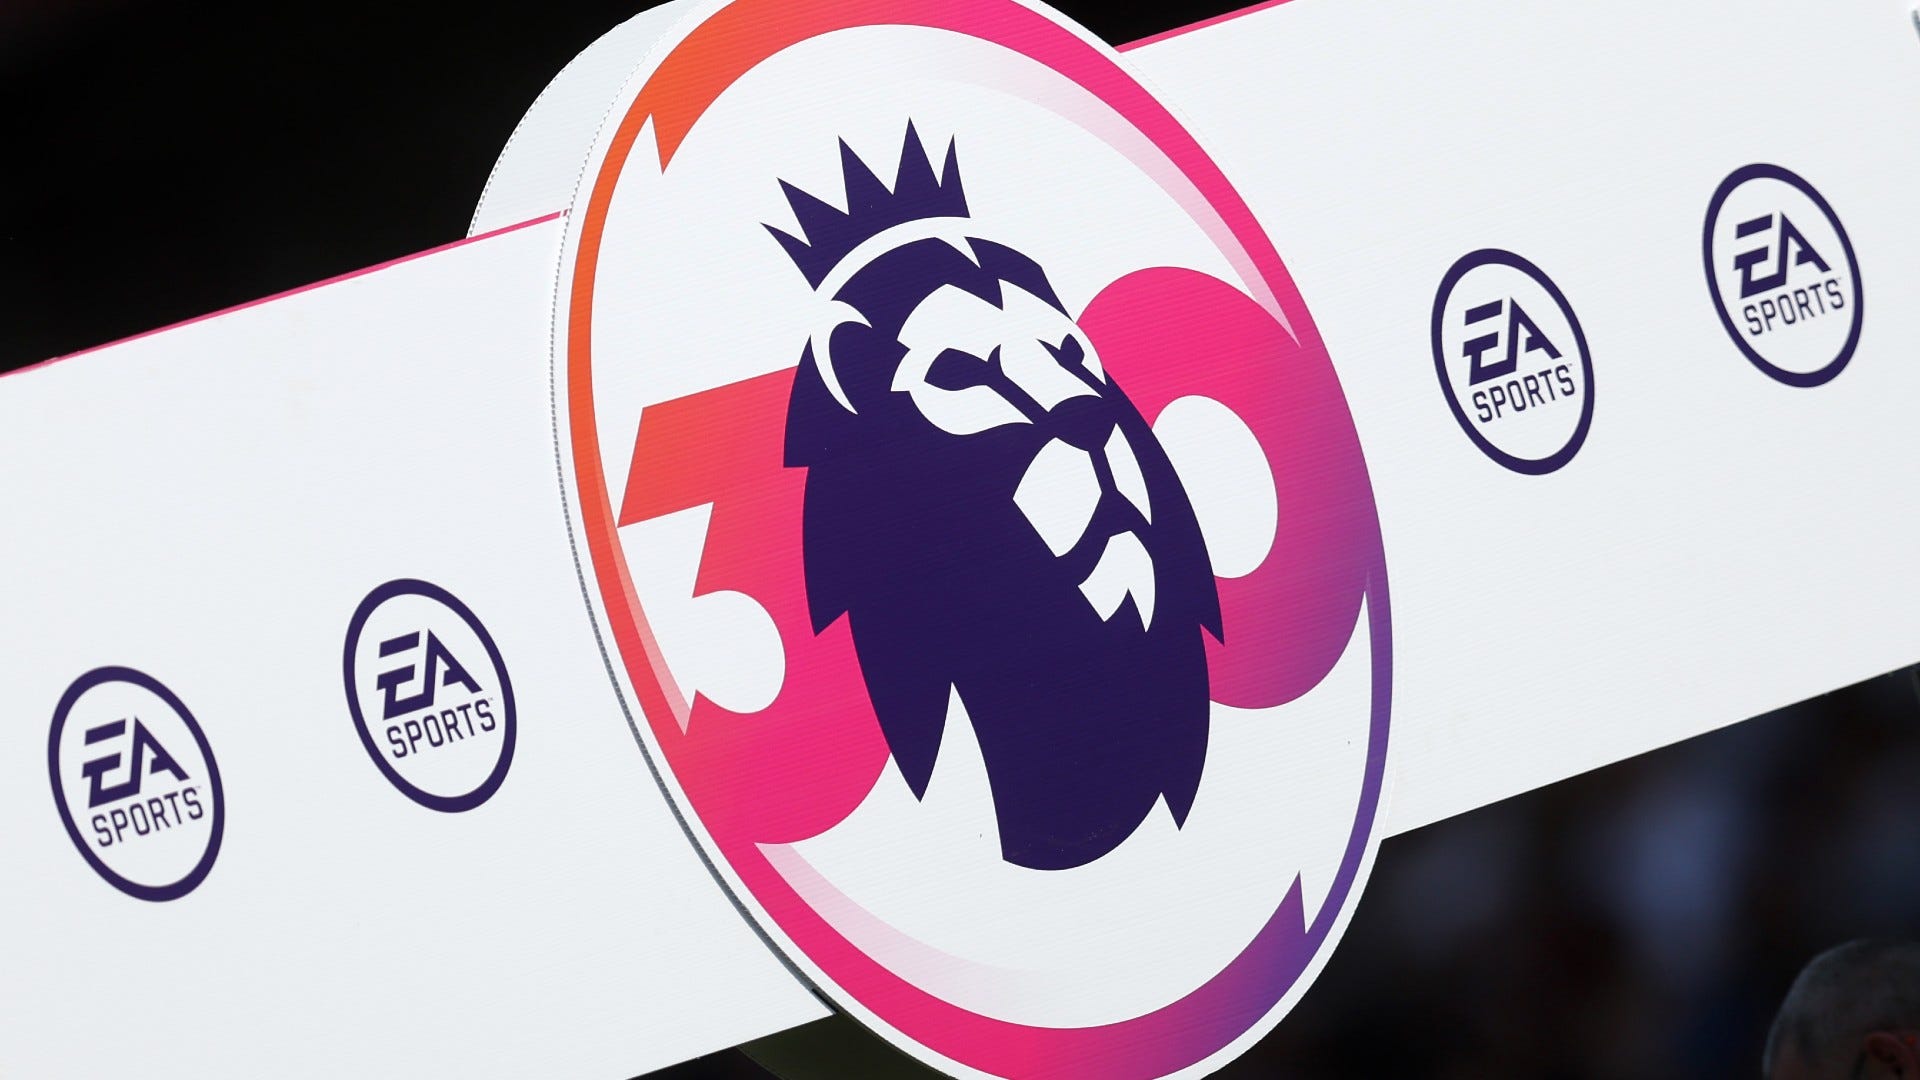 Premier League could ditch Sky Sports and BT Sport for in-house streaming in HUGE change to broadcasting Goal UK